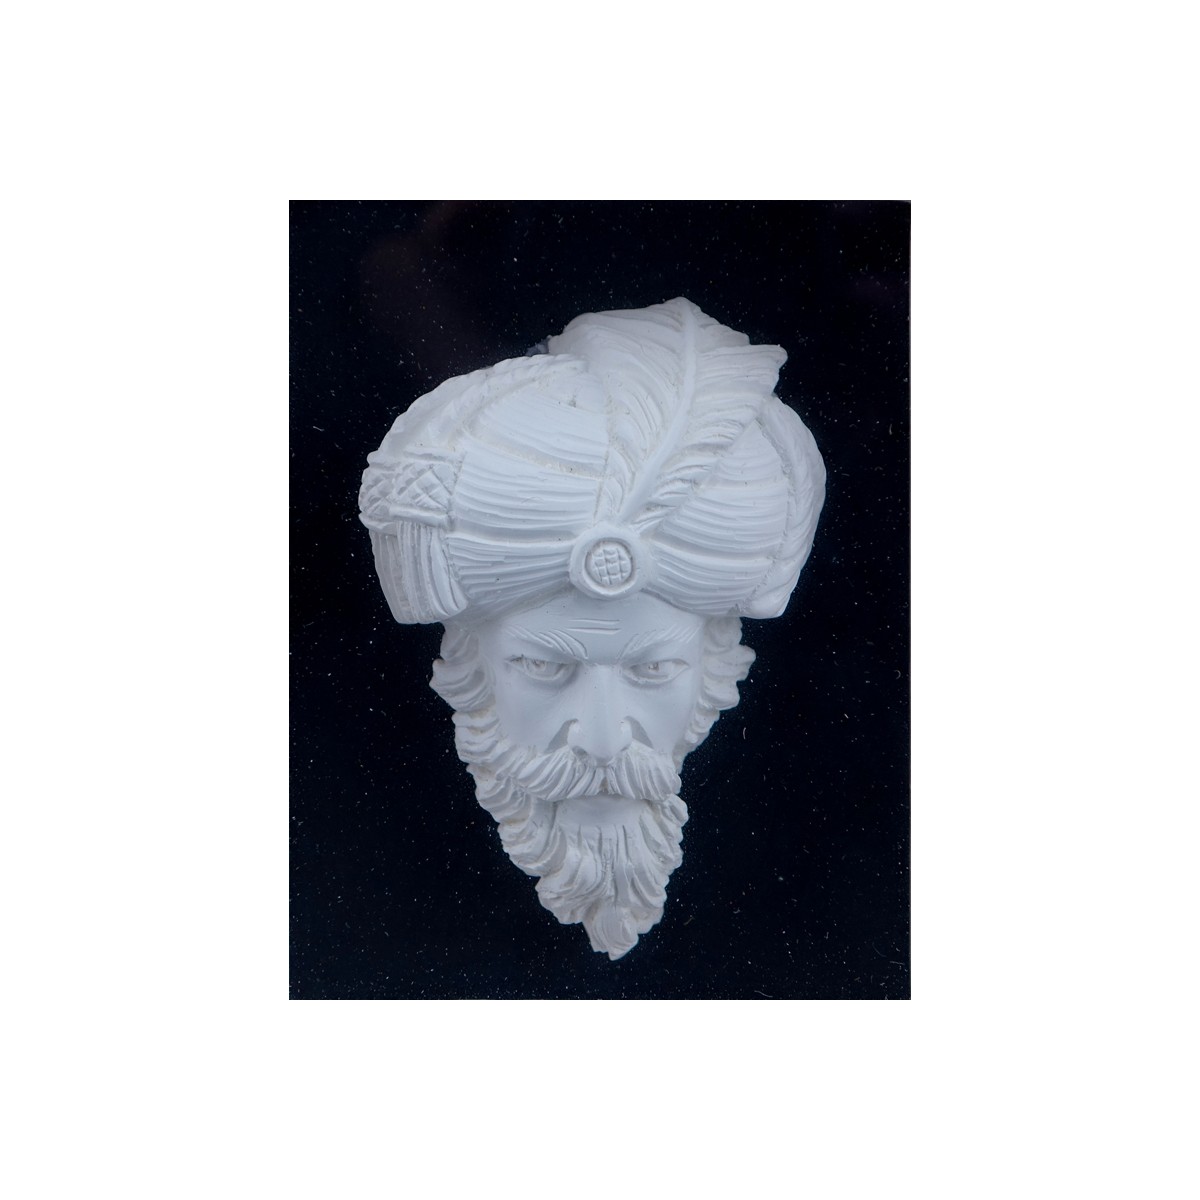 Collection of Six (6) Early 20th Century Meerschaum Carvings each of a Man Wearing a Turban. No vis